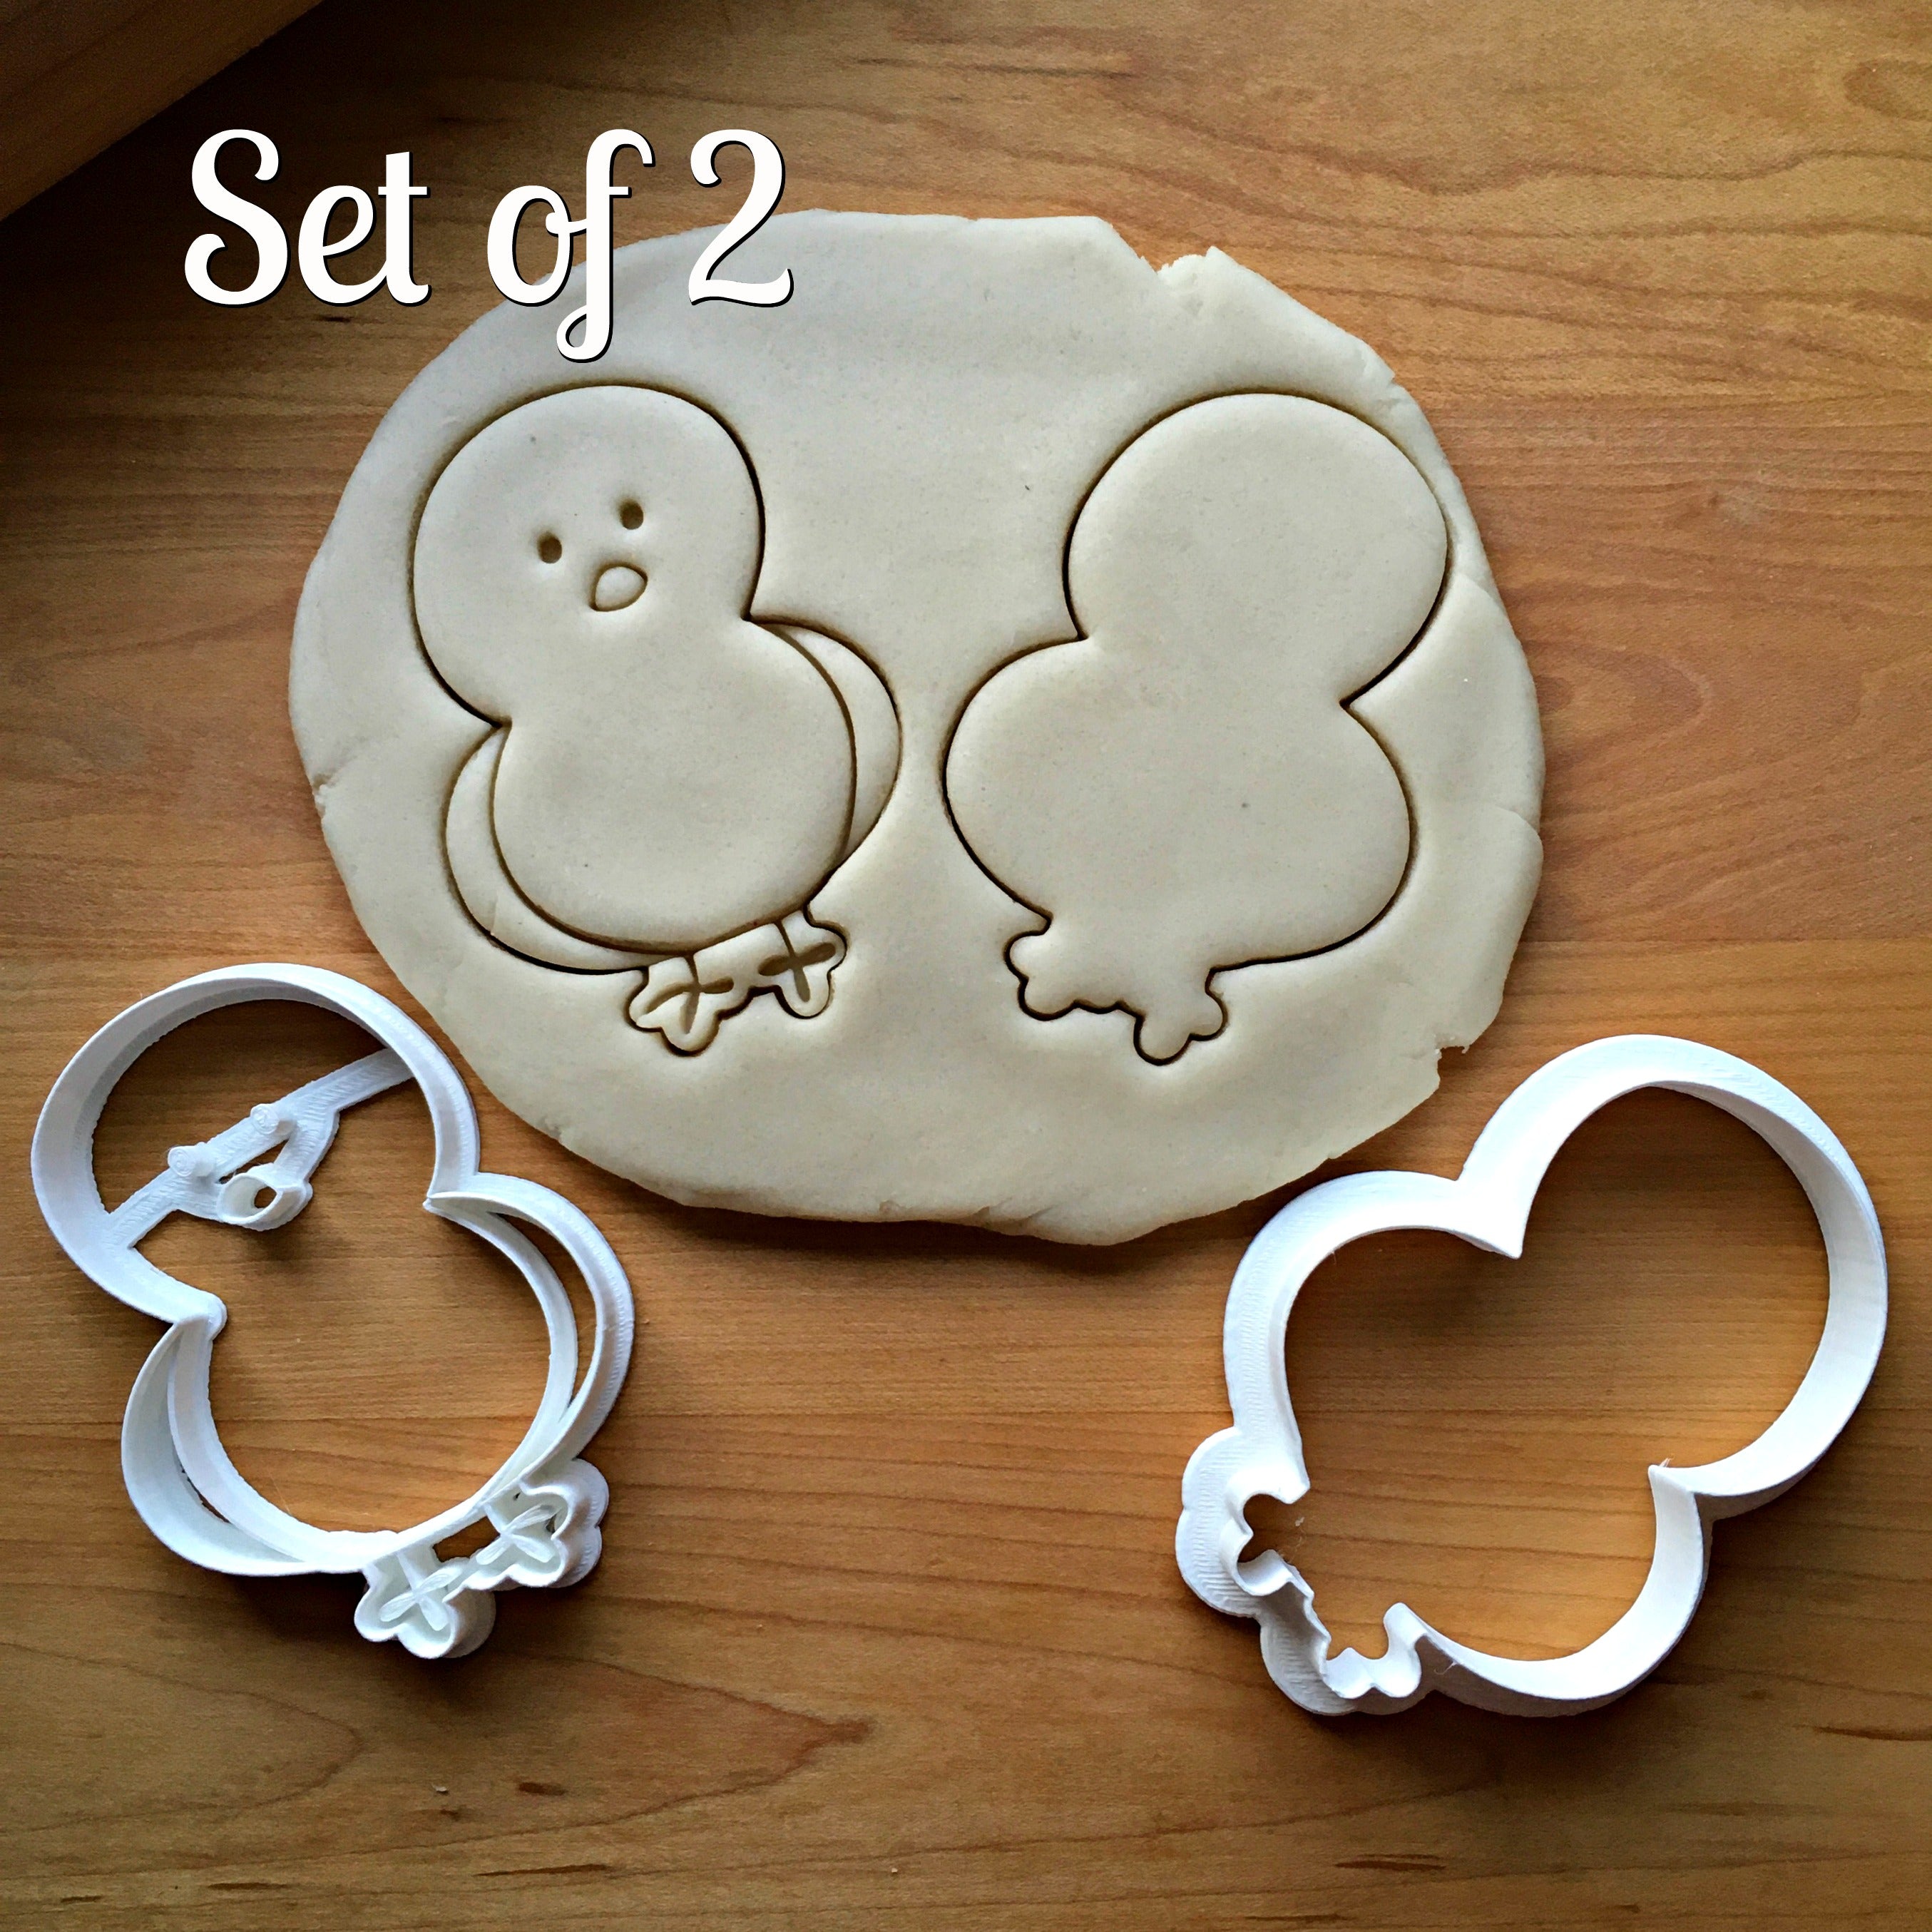 Set of 2 Baby Chick Cookie Cutters/Dishwasher Safe